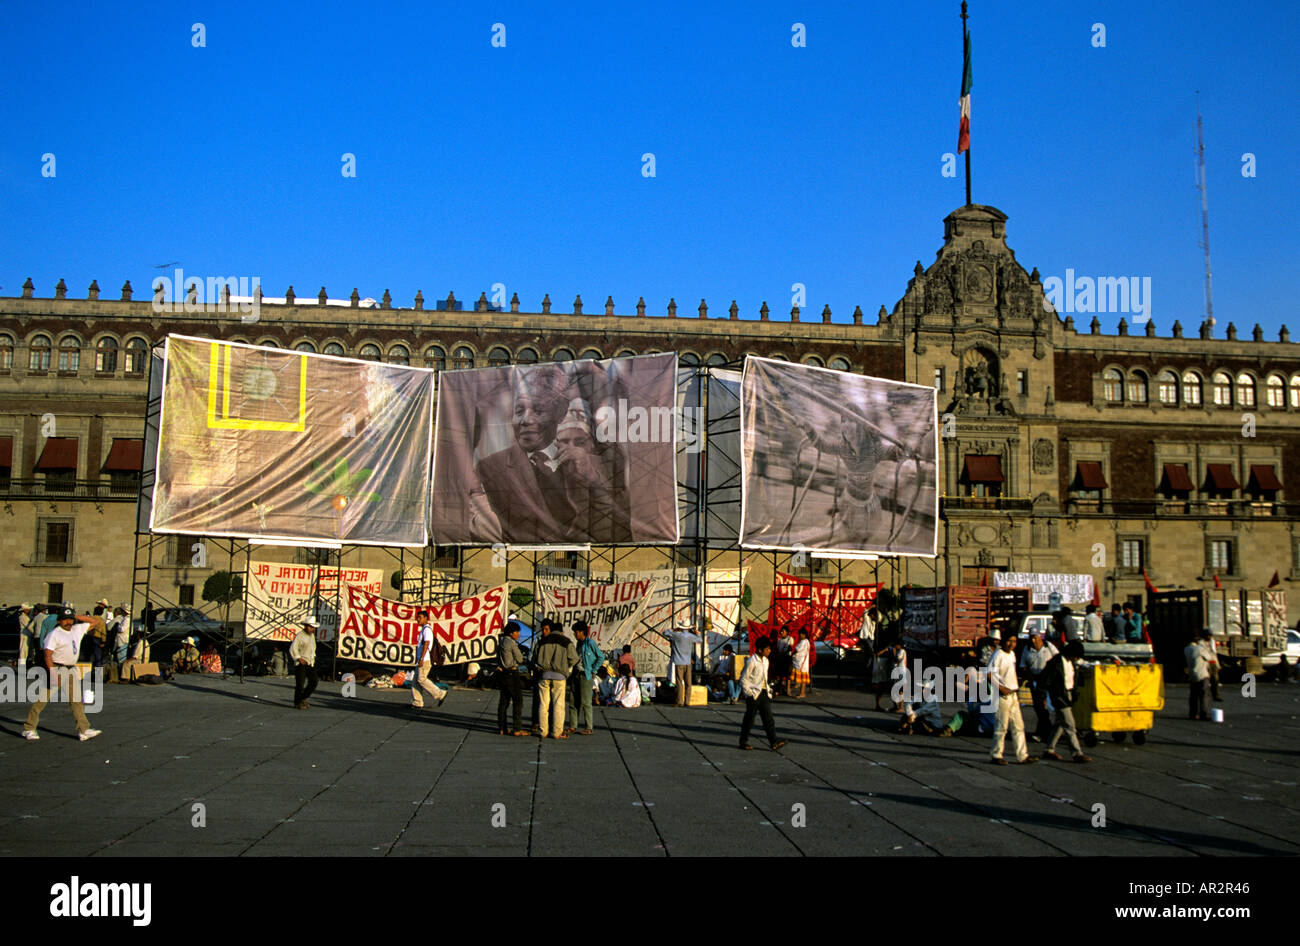 Demonstration on the Zocalo (main square), Mexico City. Stock Photo